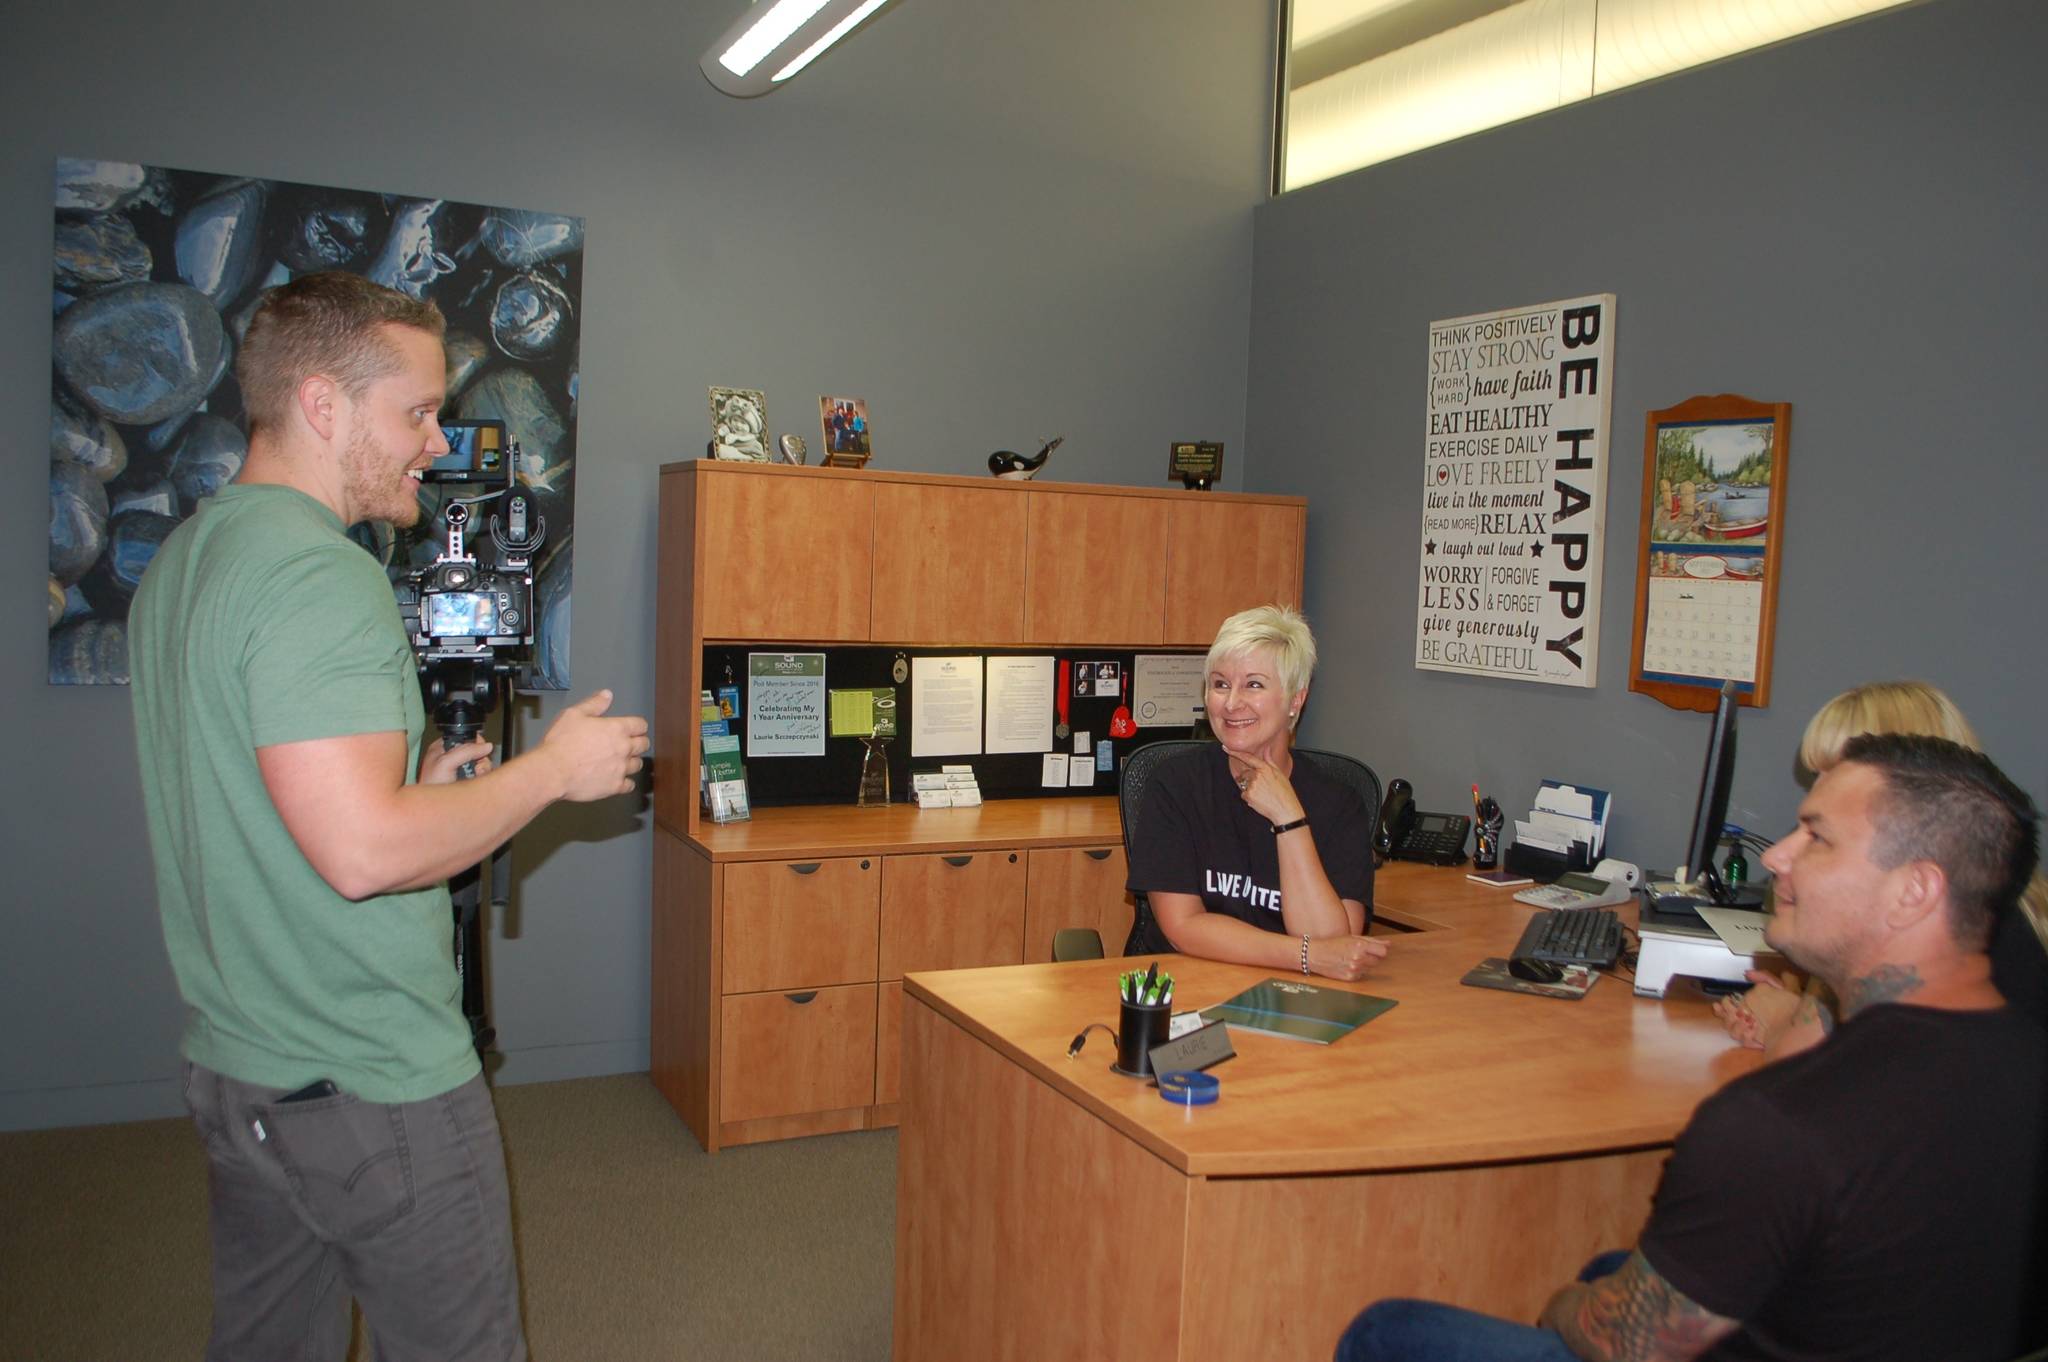 Matt Sagen, owner, producer and cinematographer of Cascadia Films, left, directs Laurie Szczepczynski of Sound Community Bank in Port Angeles and her clients Mark Ray and Haley Ray for a community video he is filming for United Way of Clallam County.